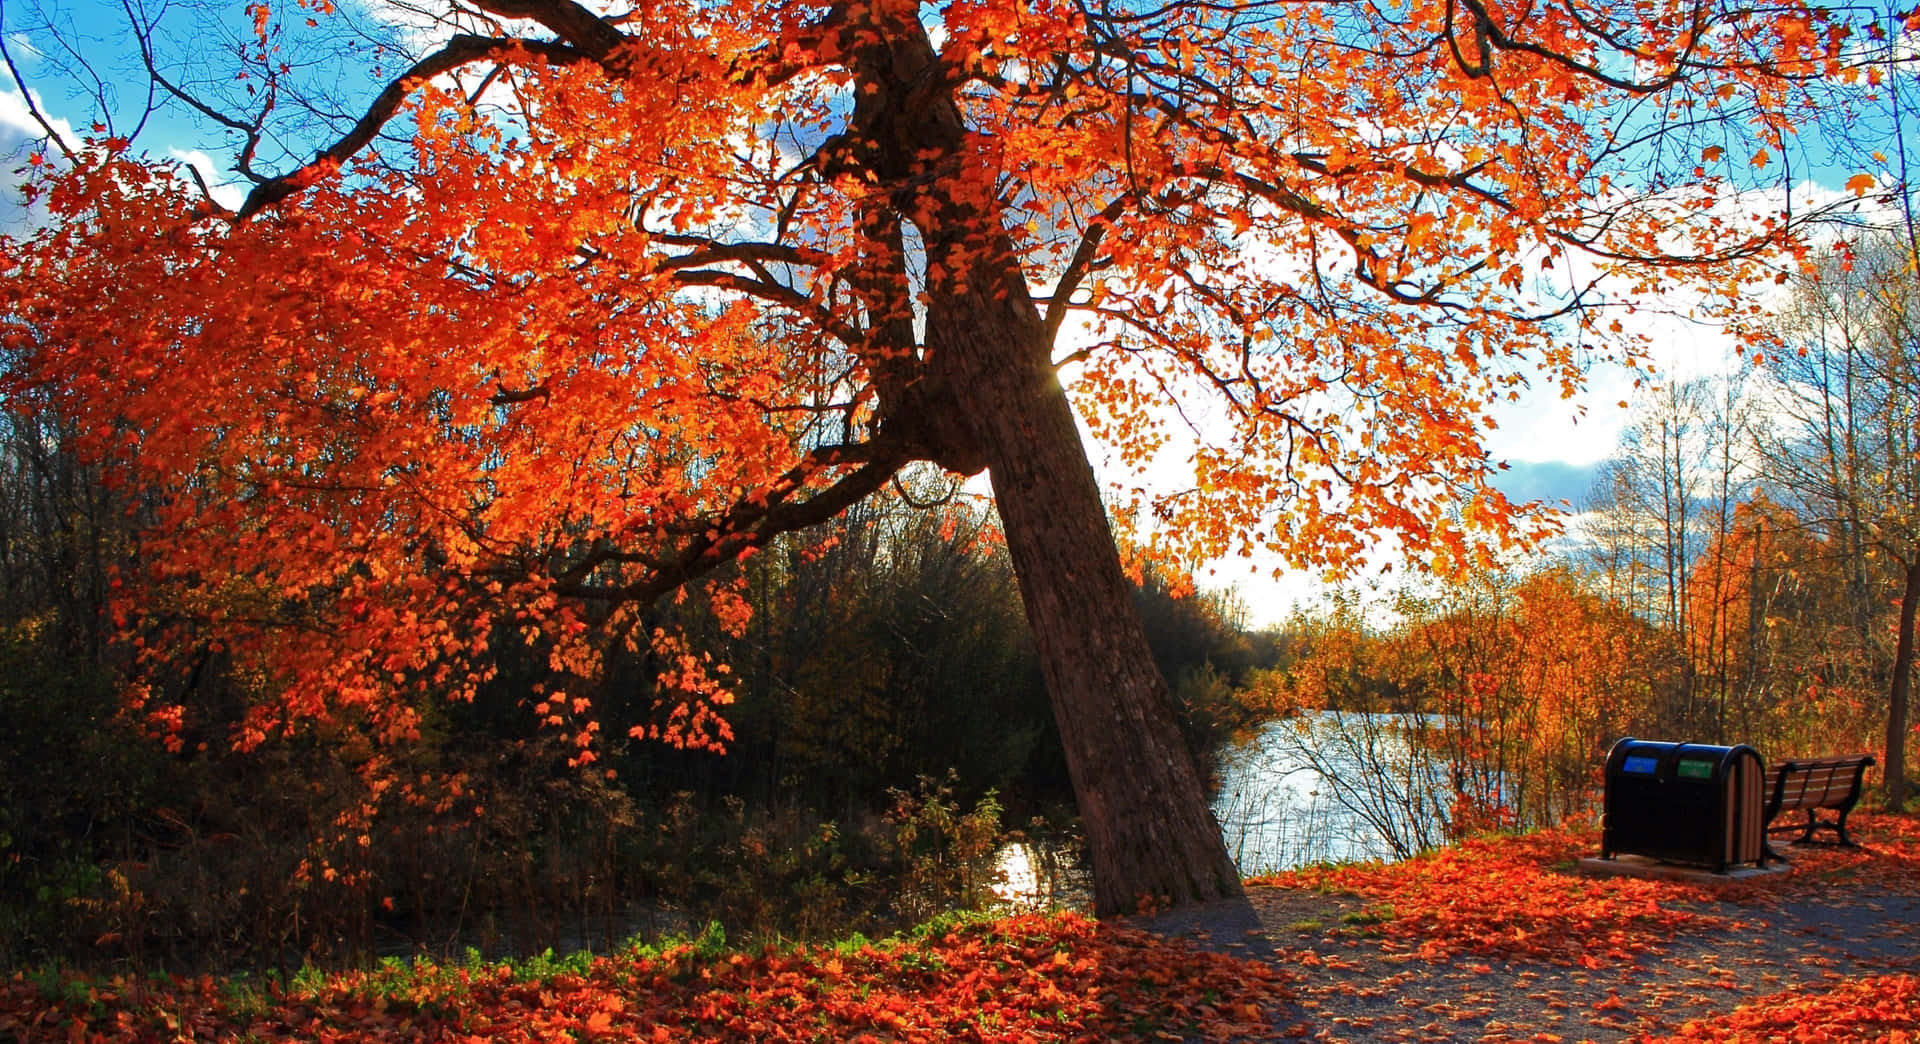 Take a peaceful stroll in the breathtaking hues of fall! Wallpaper